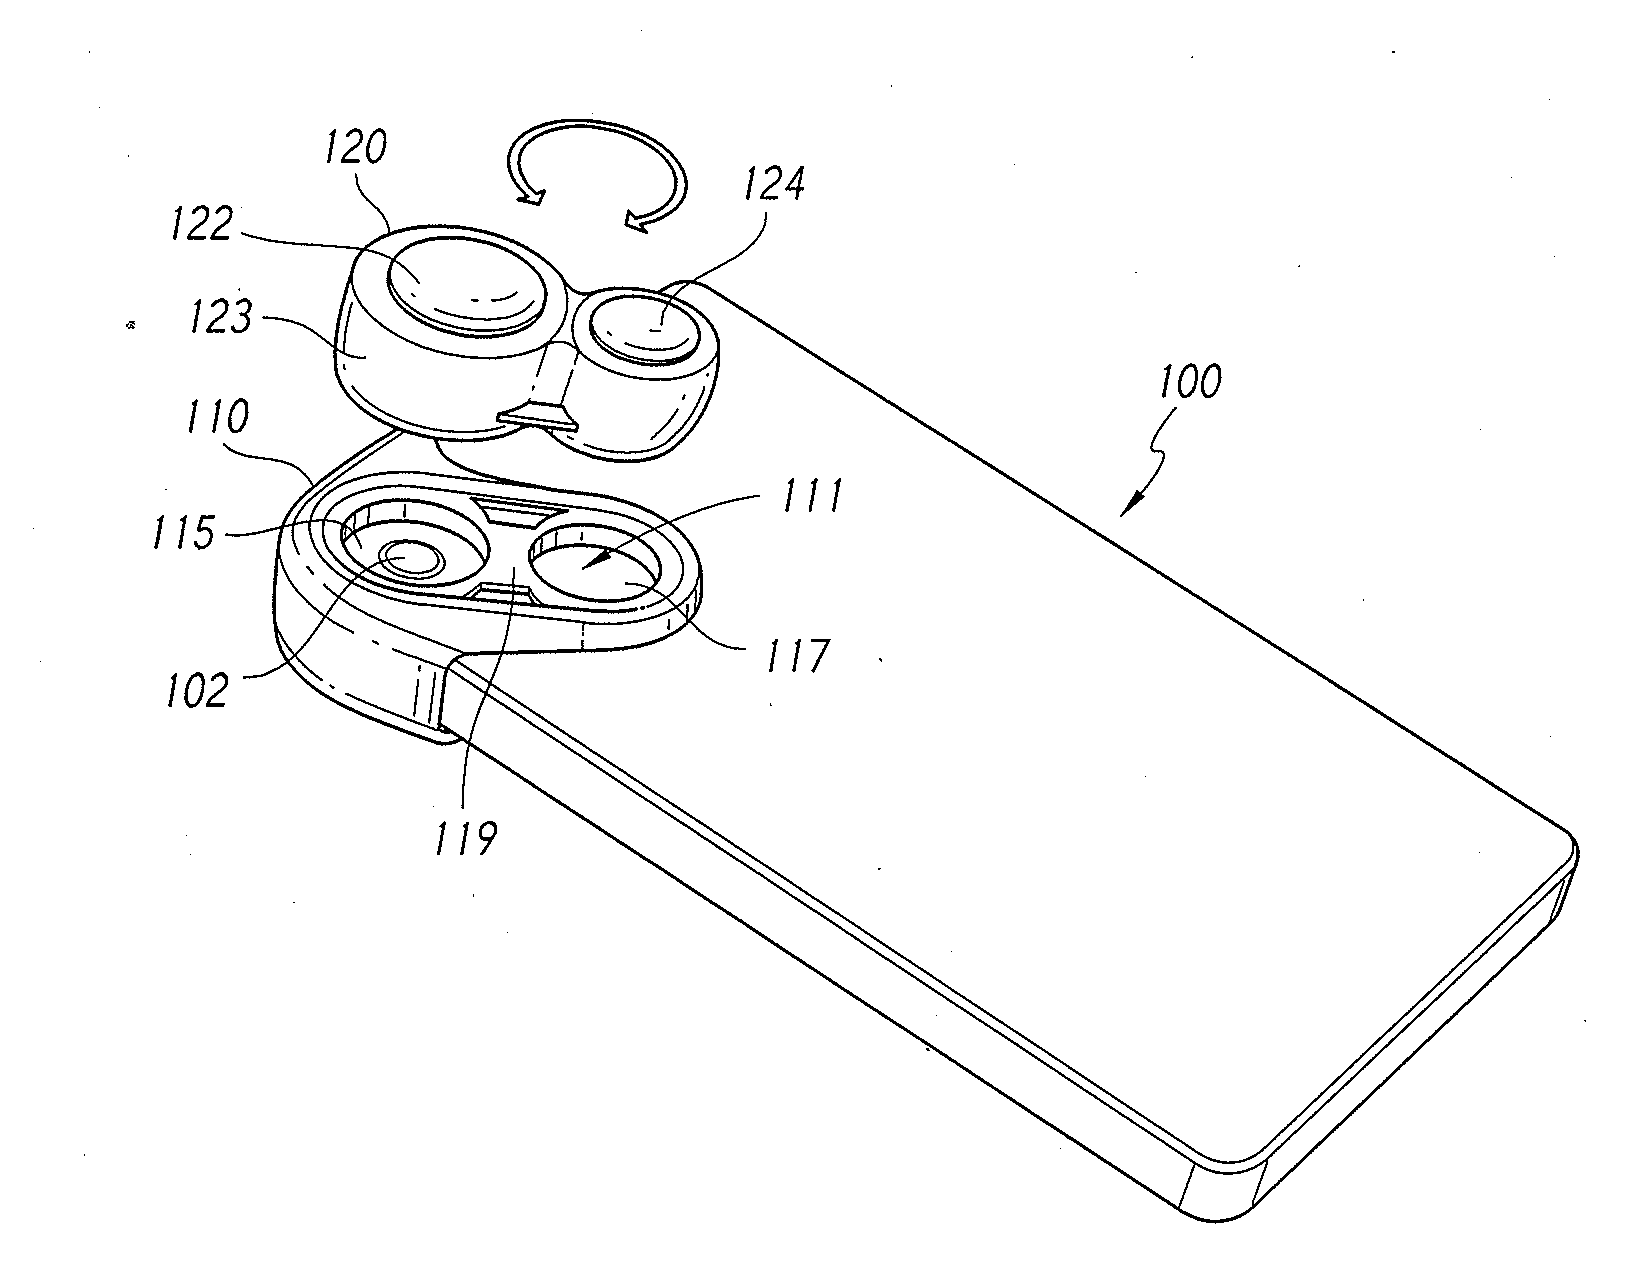 Removable lenses for mobile electronic devices